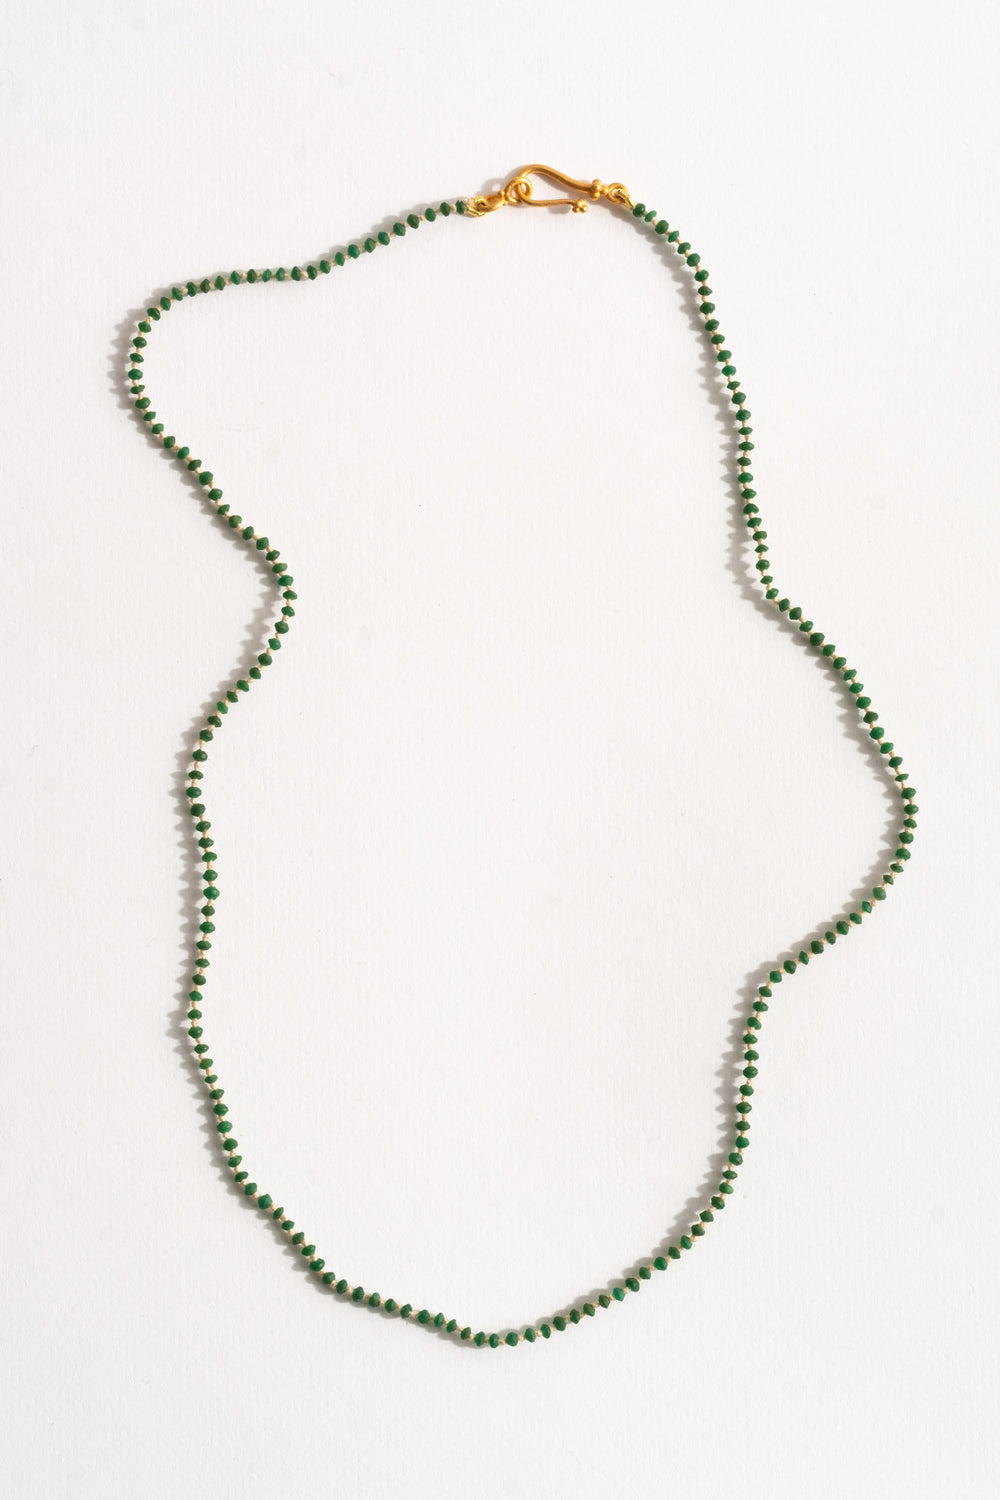 22k + Tiny Faceted Emerald Strand